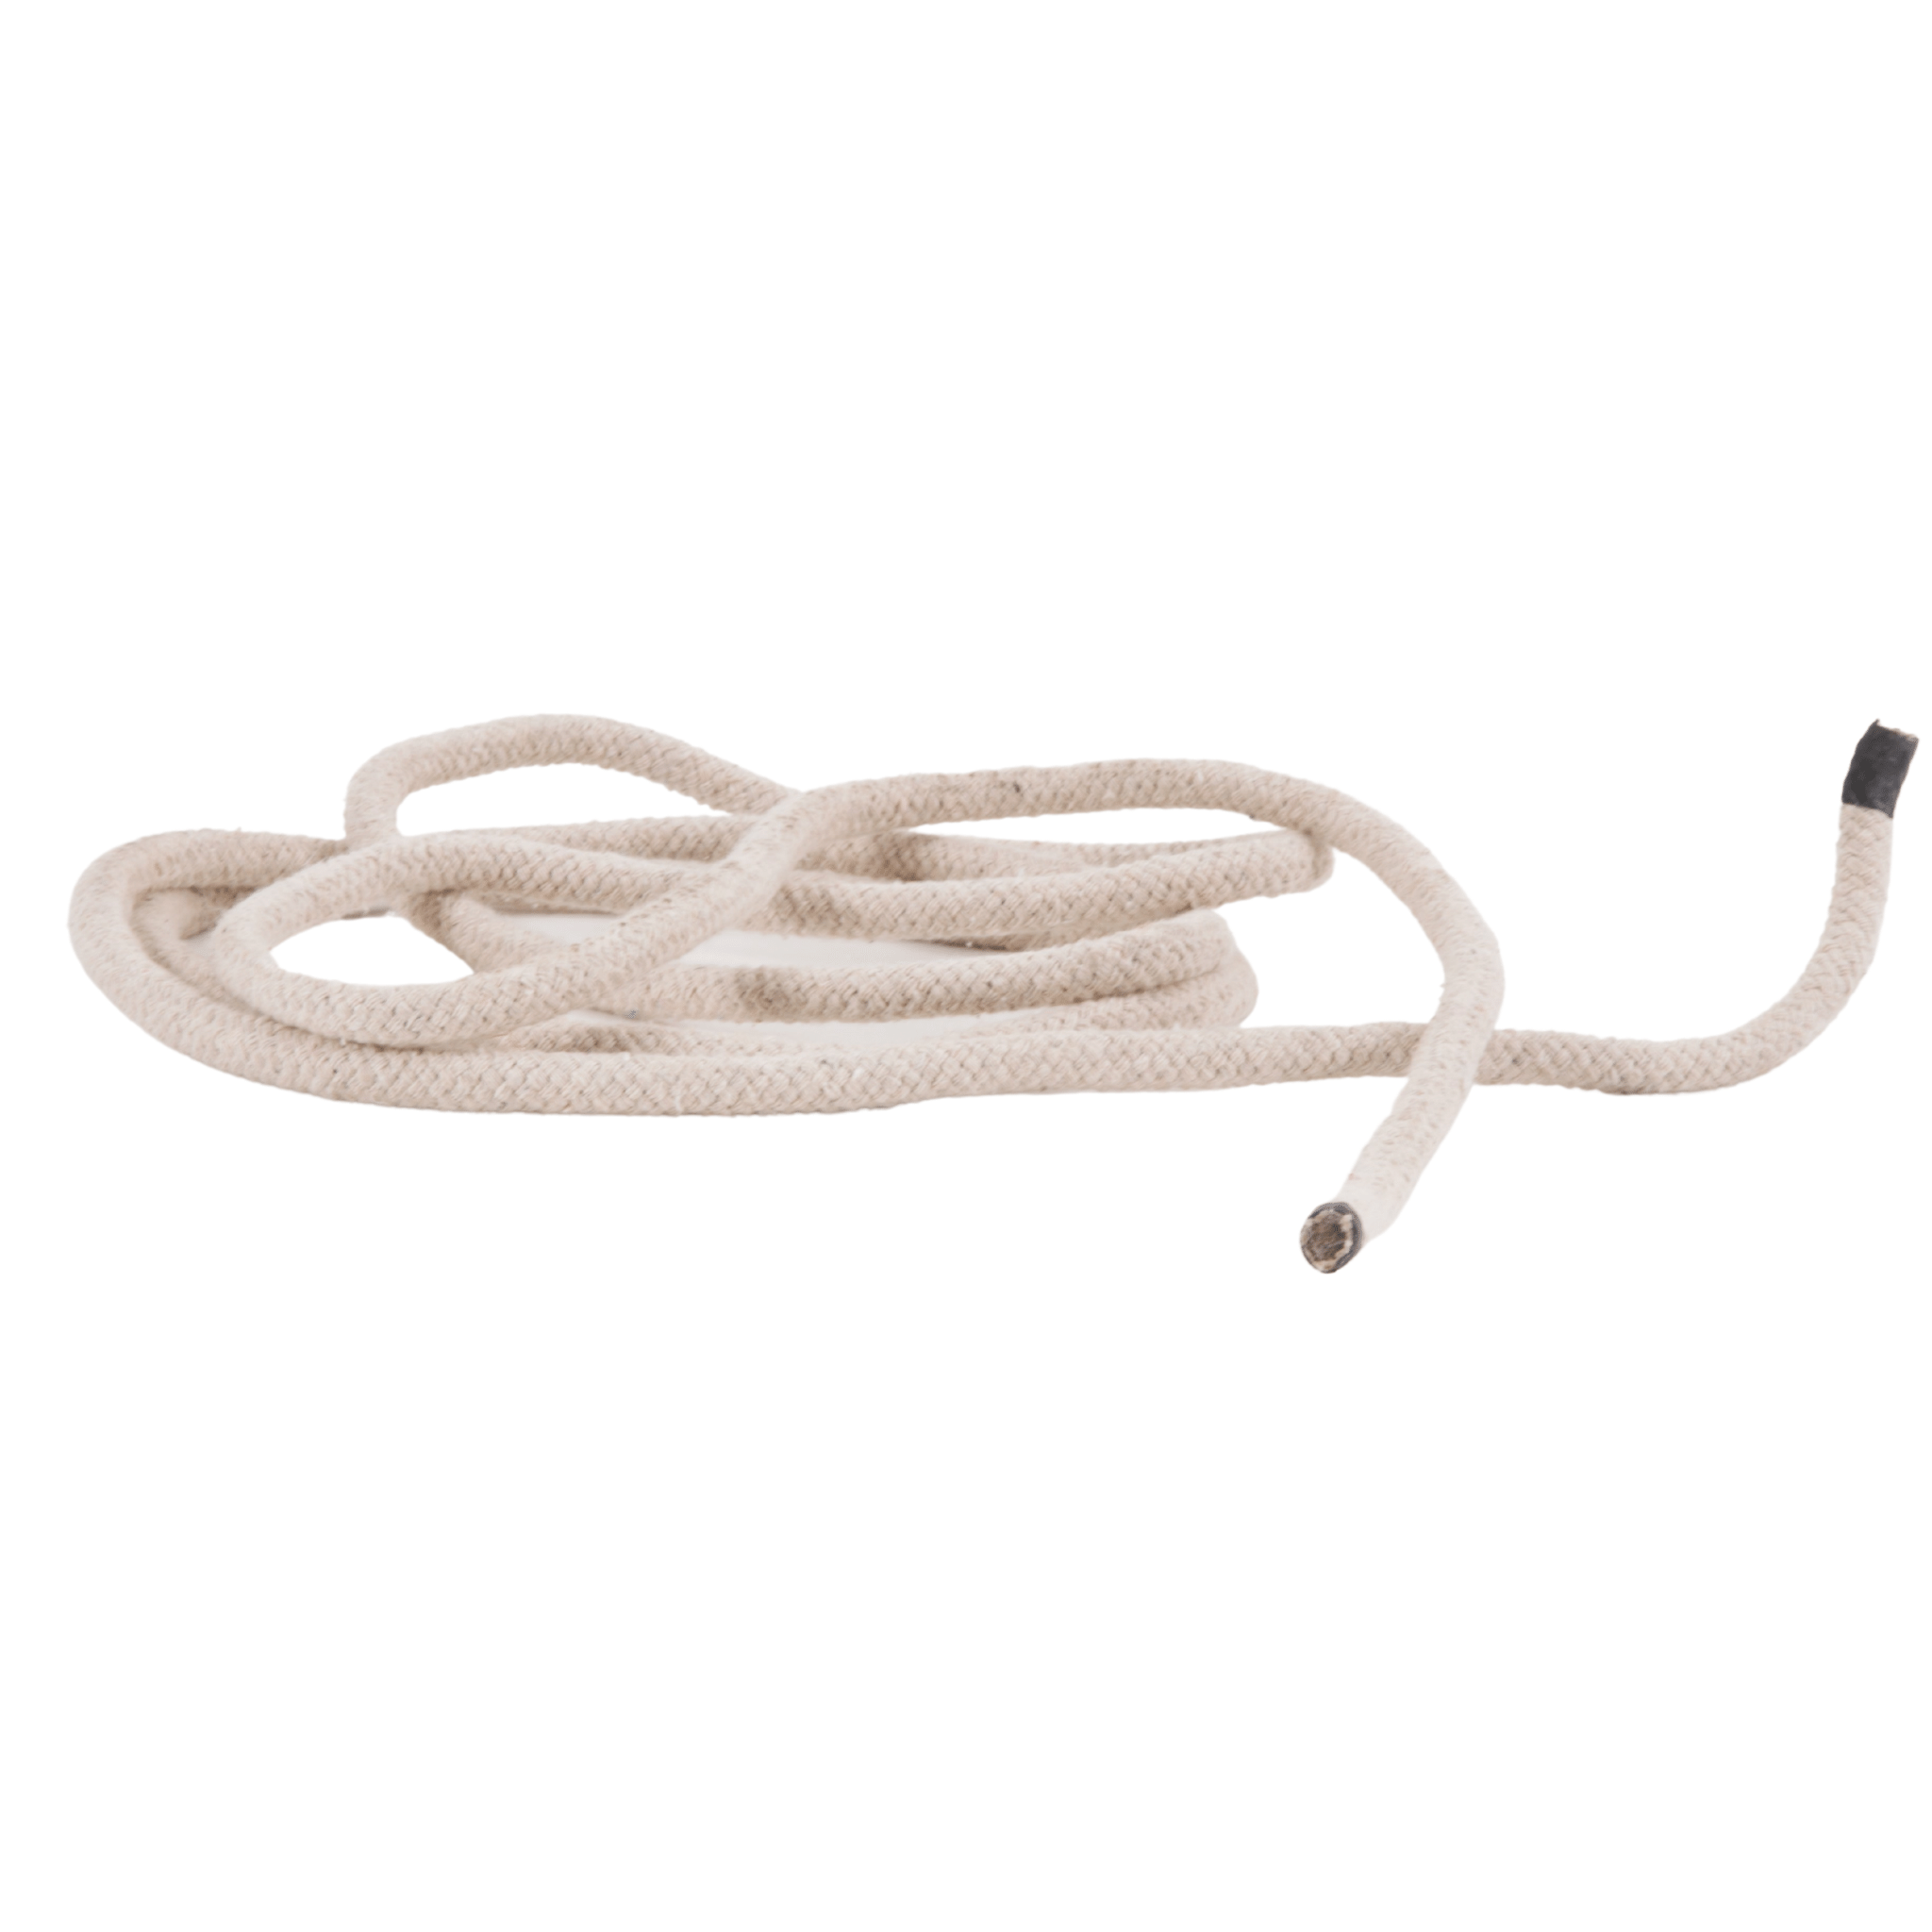 cotton skipping rope no handle schools or clubs